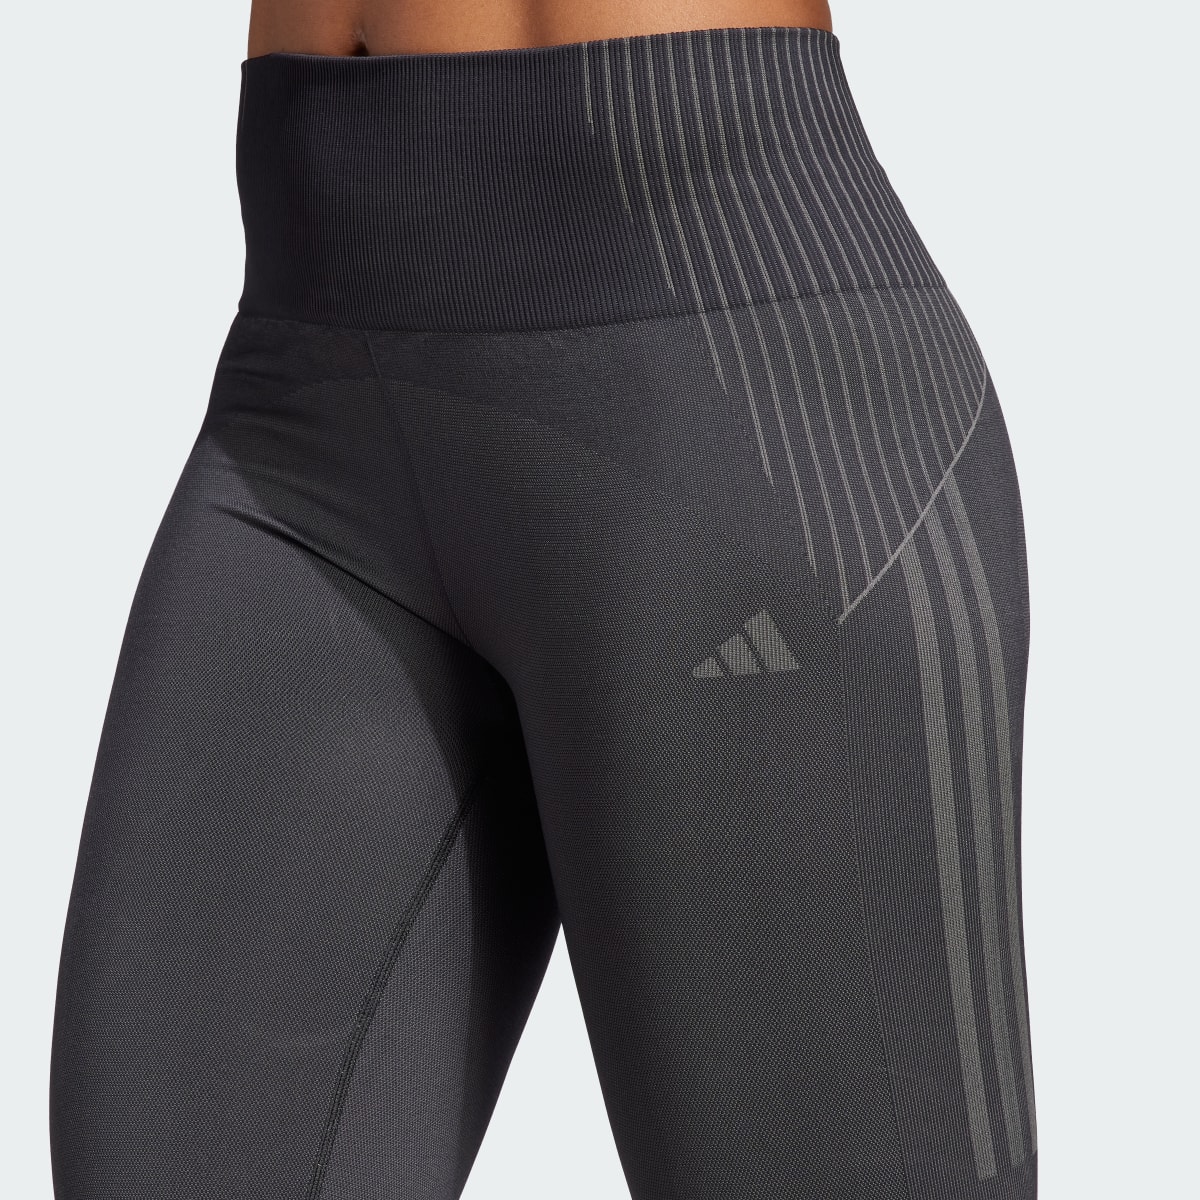 Adidas Legging 7/8 sans coutures Branded. 6